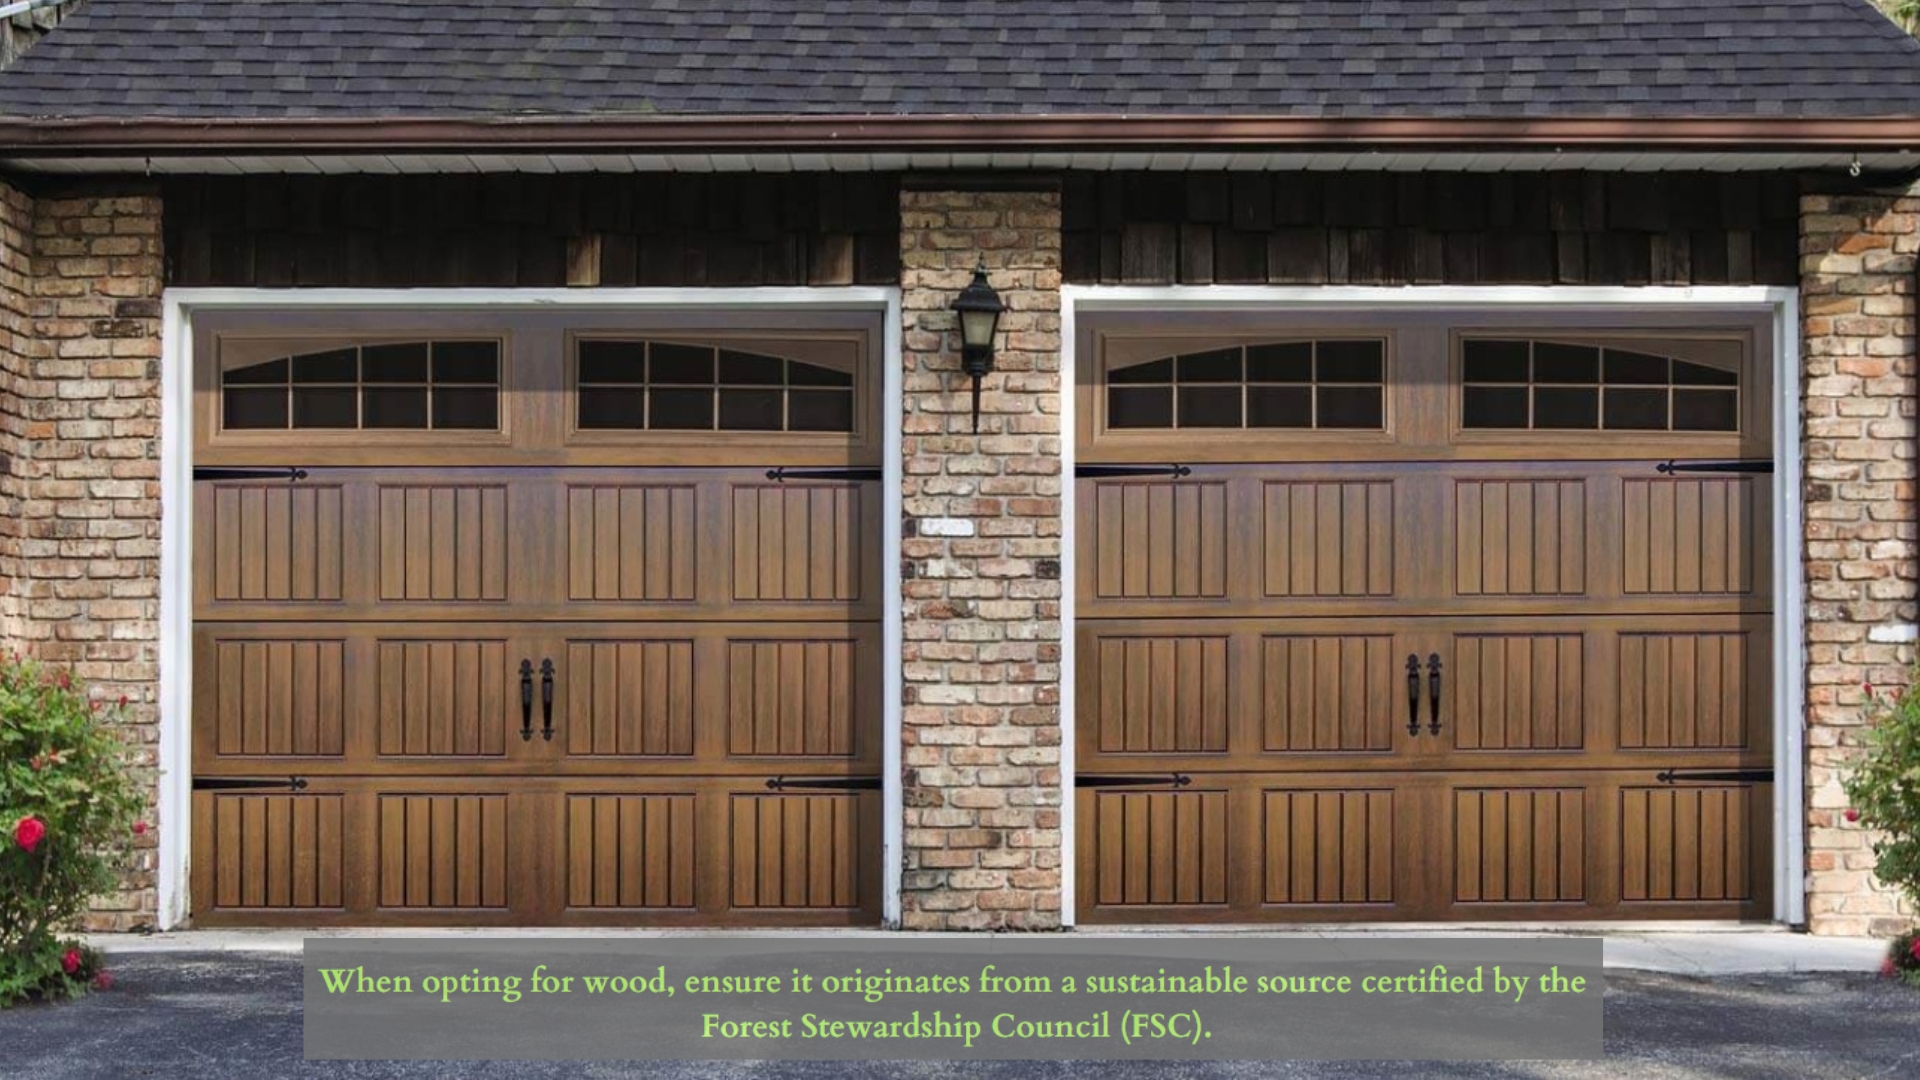 A eco-friendly garage doors with FSC certificate